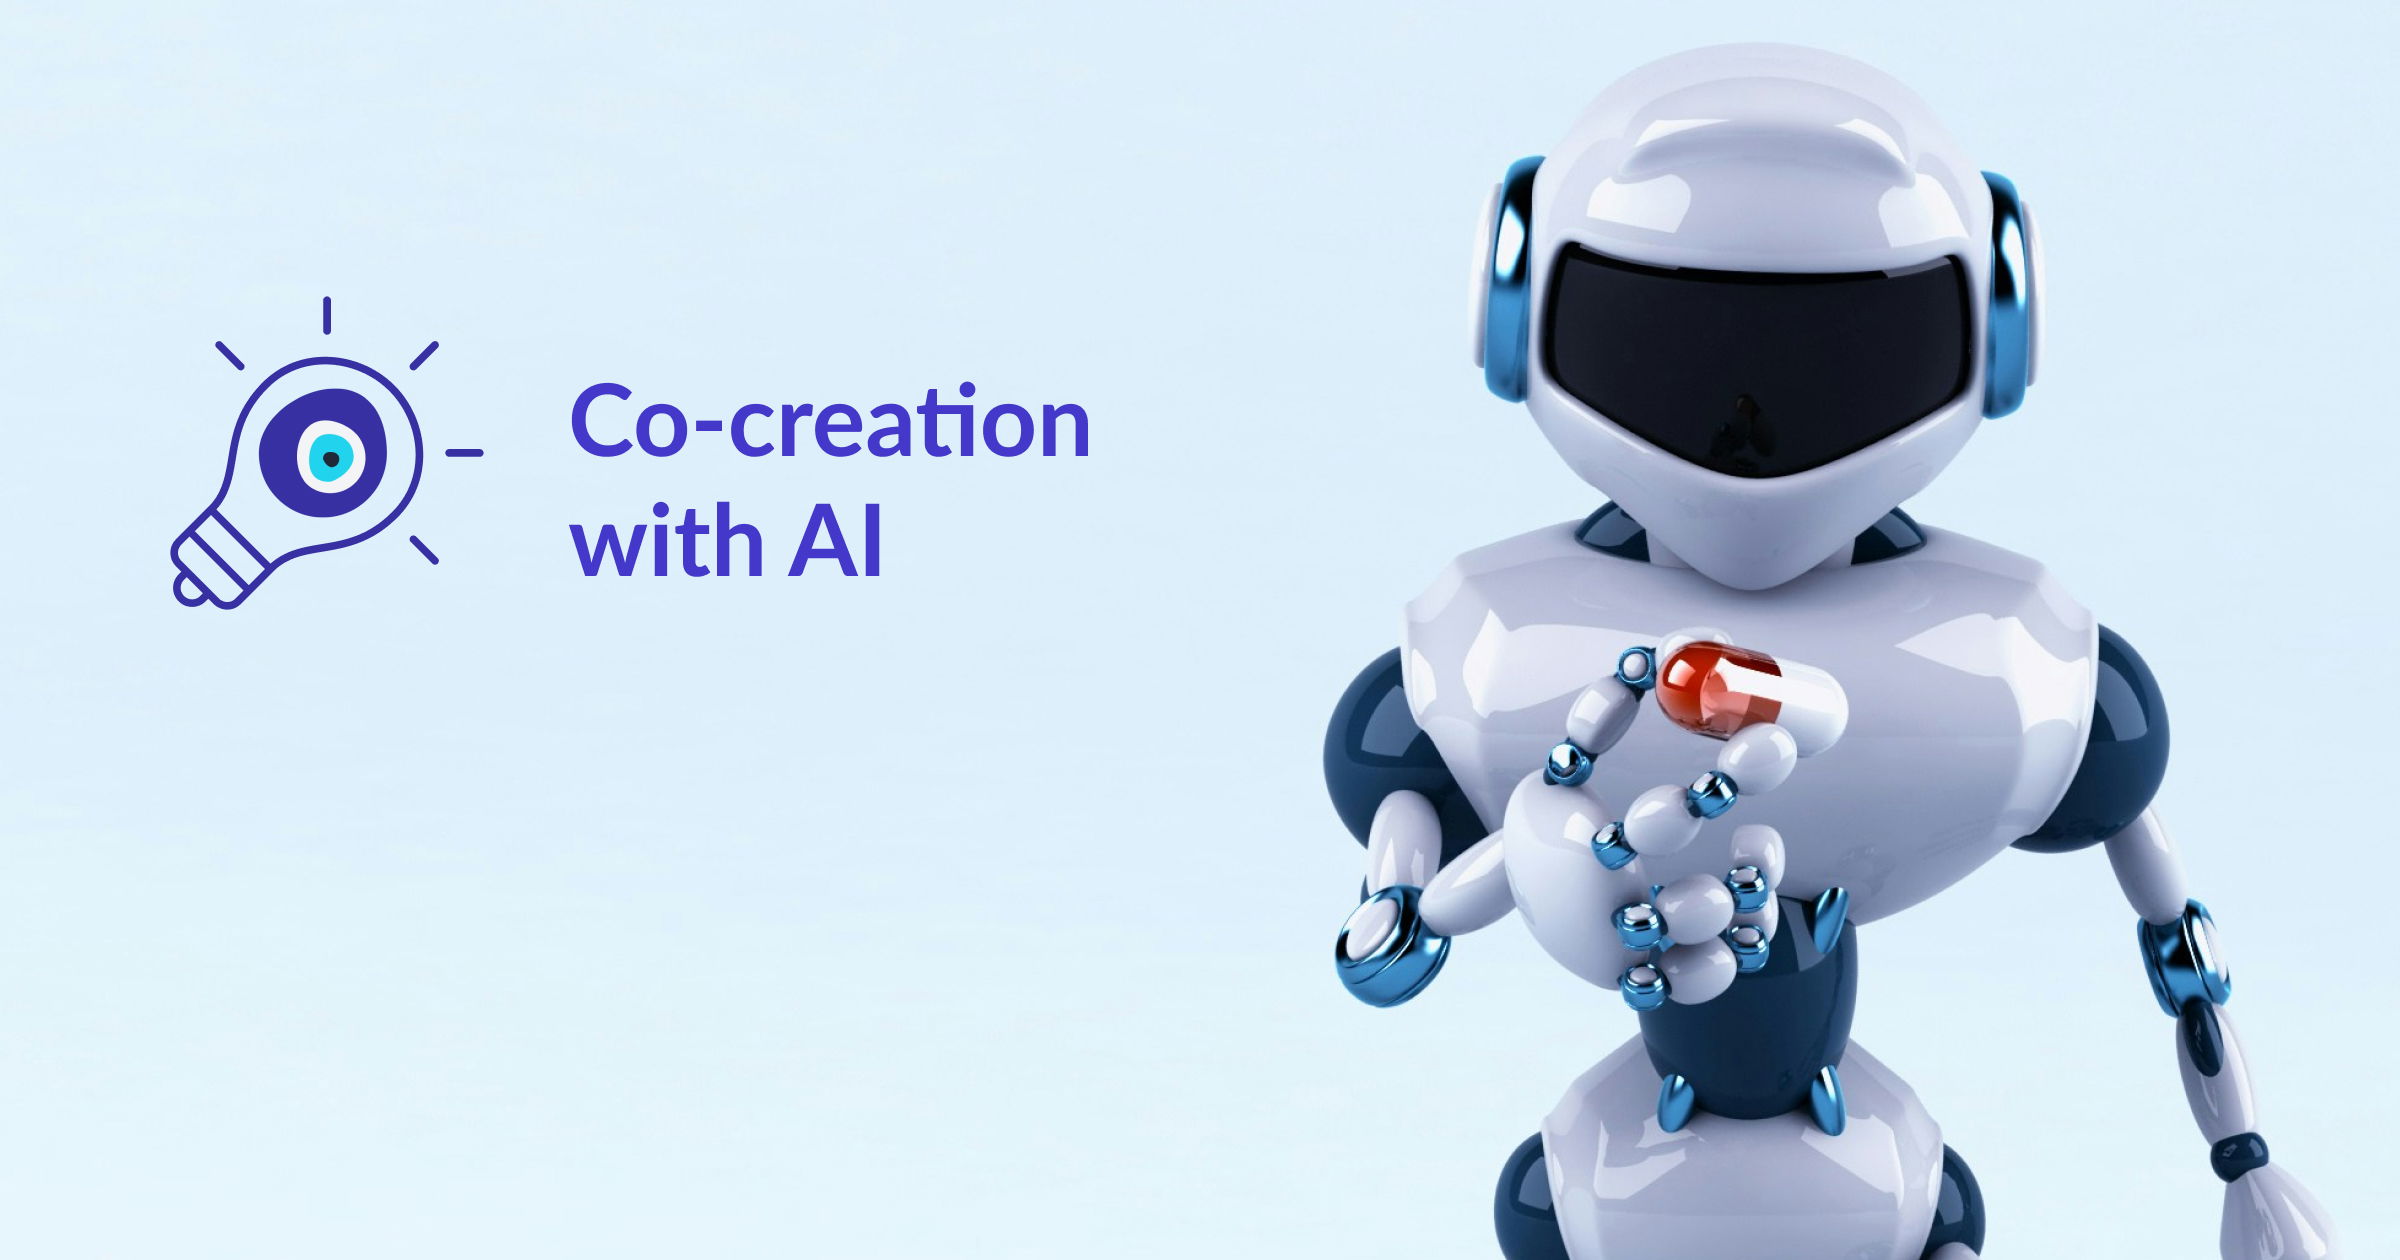 Text saying "Co-creation with AI" and a robot holding a pill to suggest Artificial Intelligence